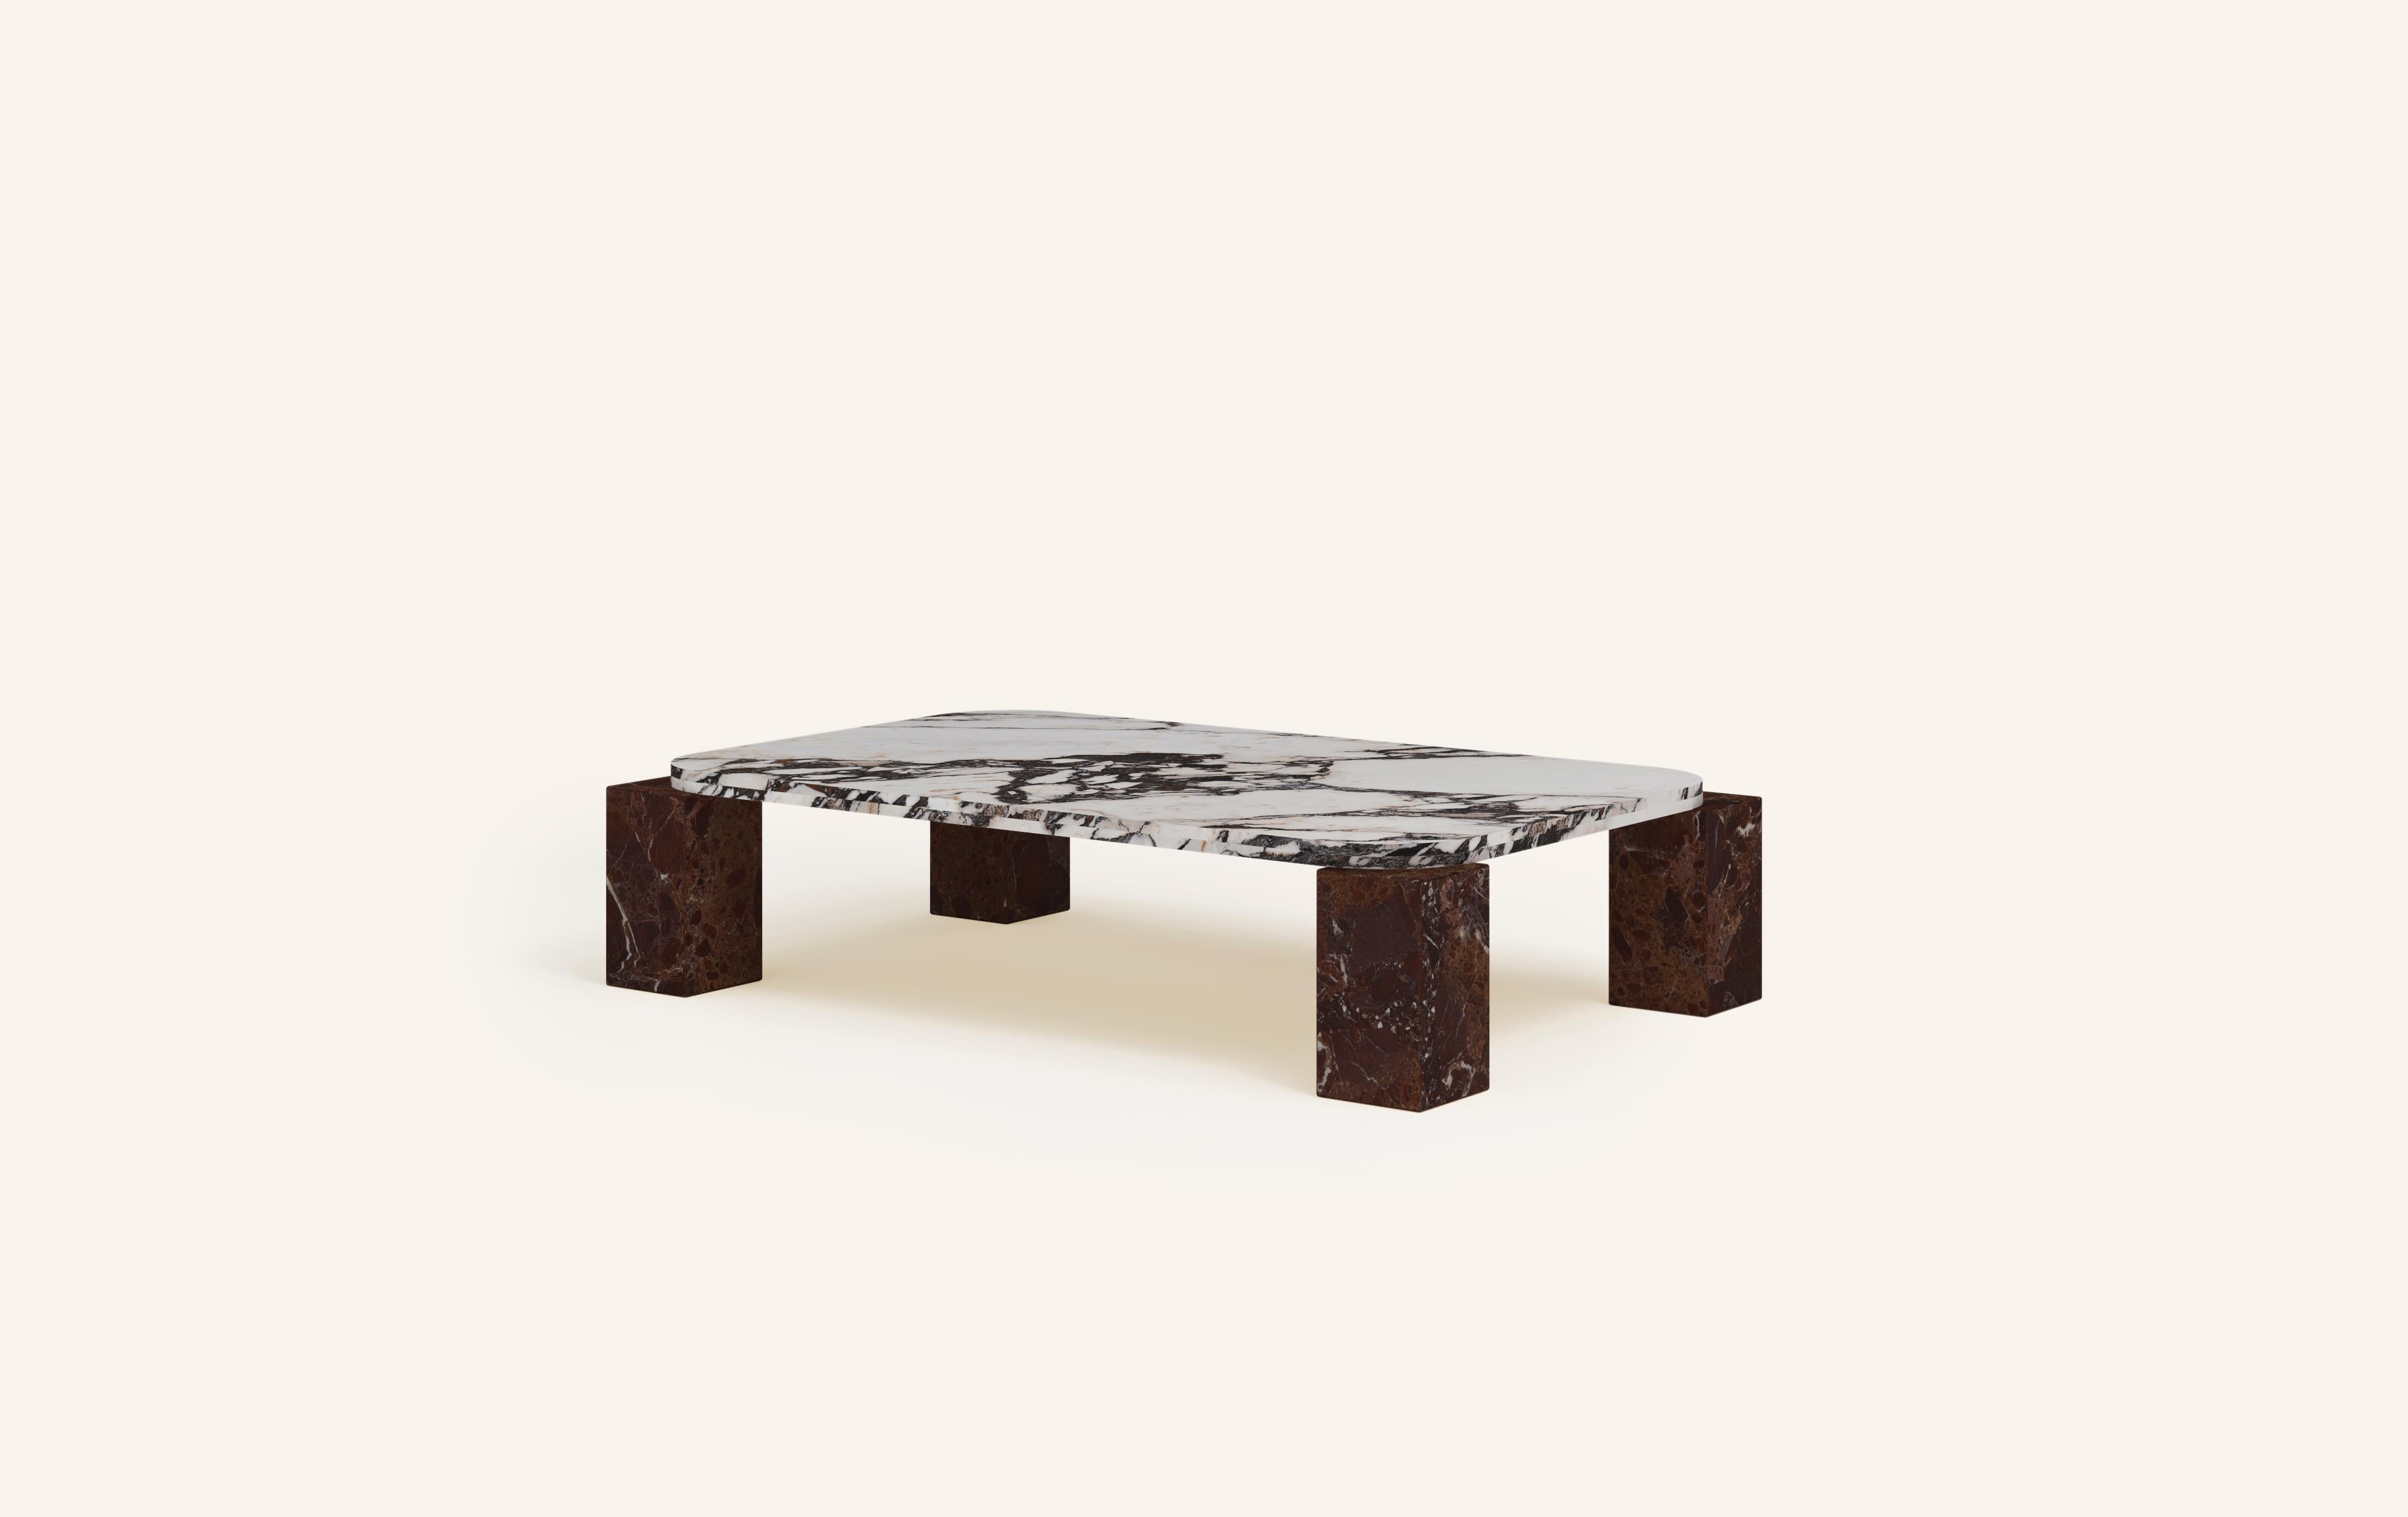 Organic Modern FORM(LA) Cubo Rectangle Coffee Table 62”L x 38”W x 14”H Viola & Rosso Marble For Sale